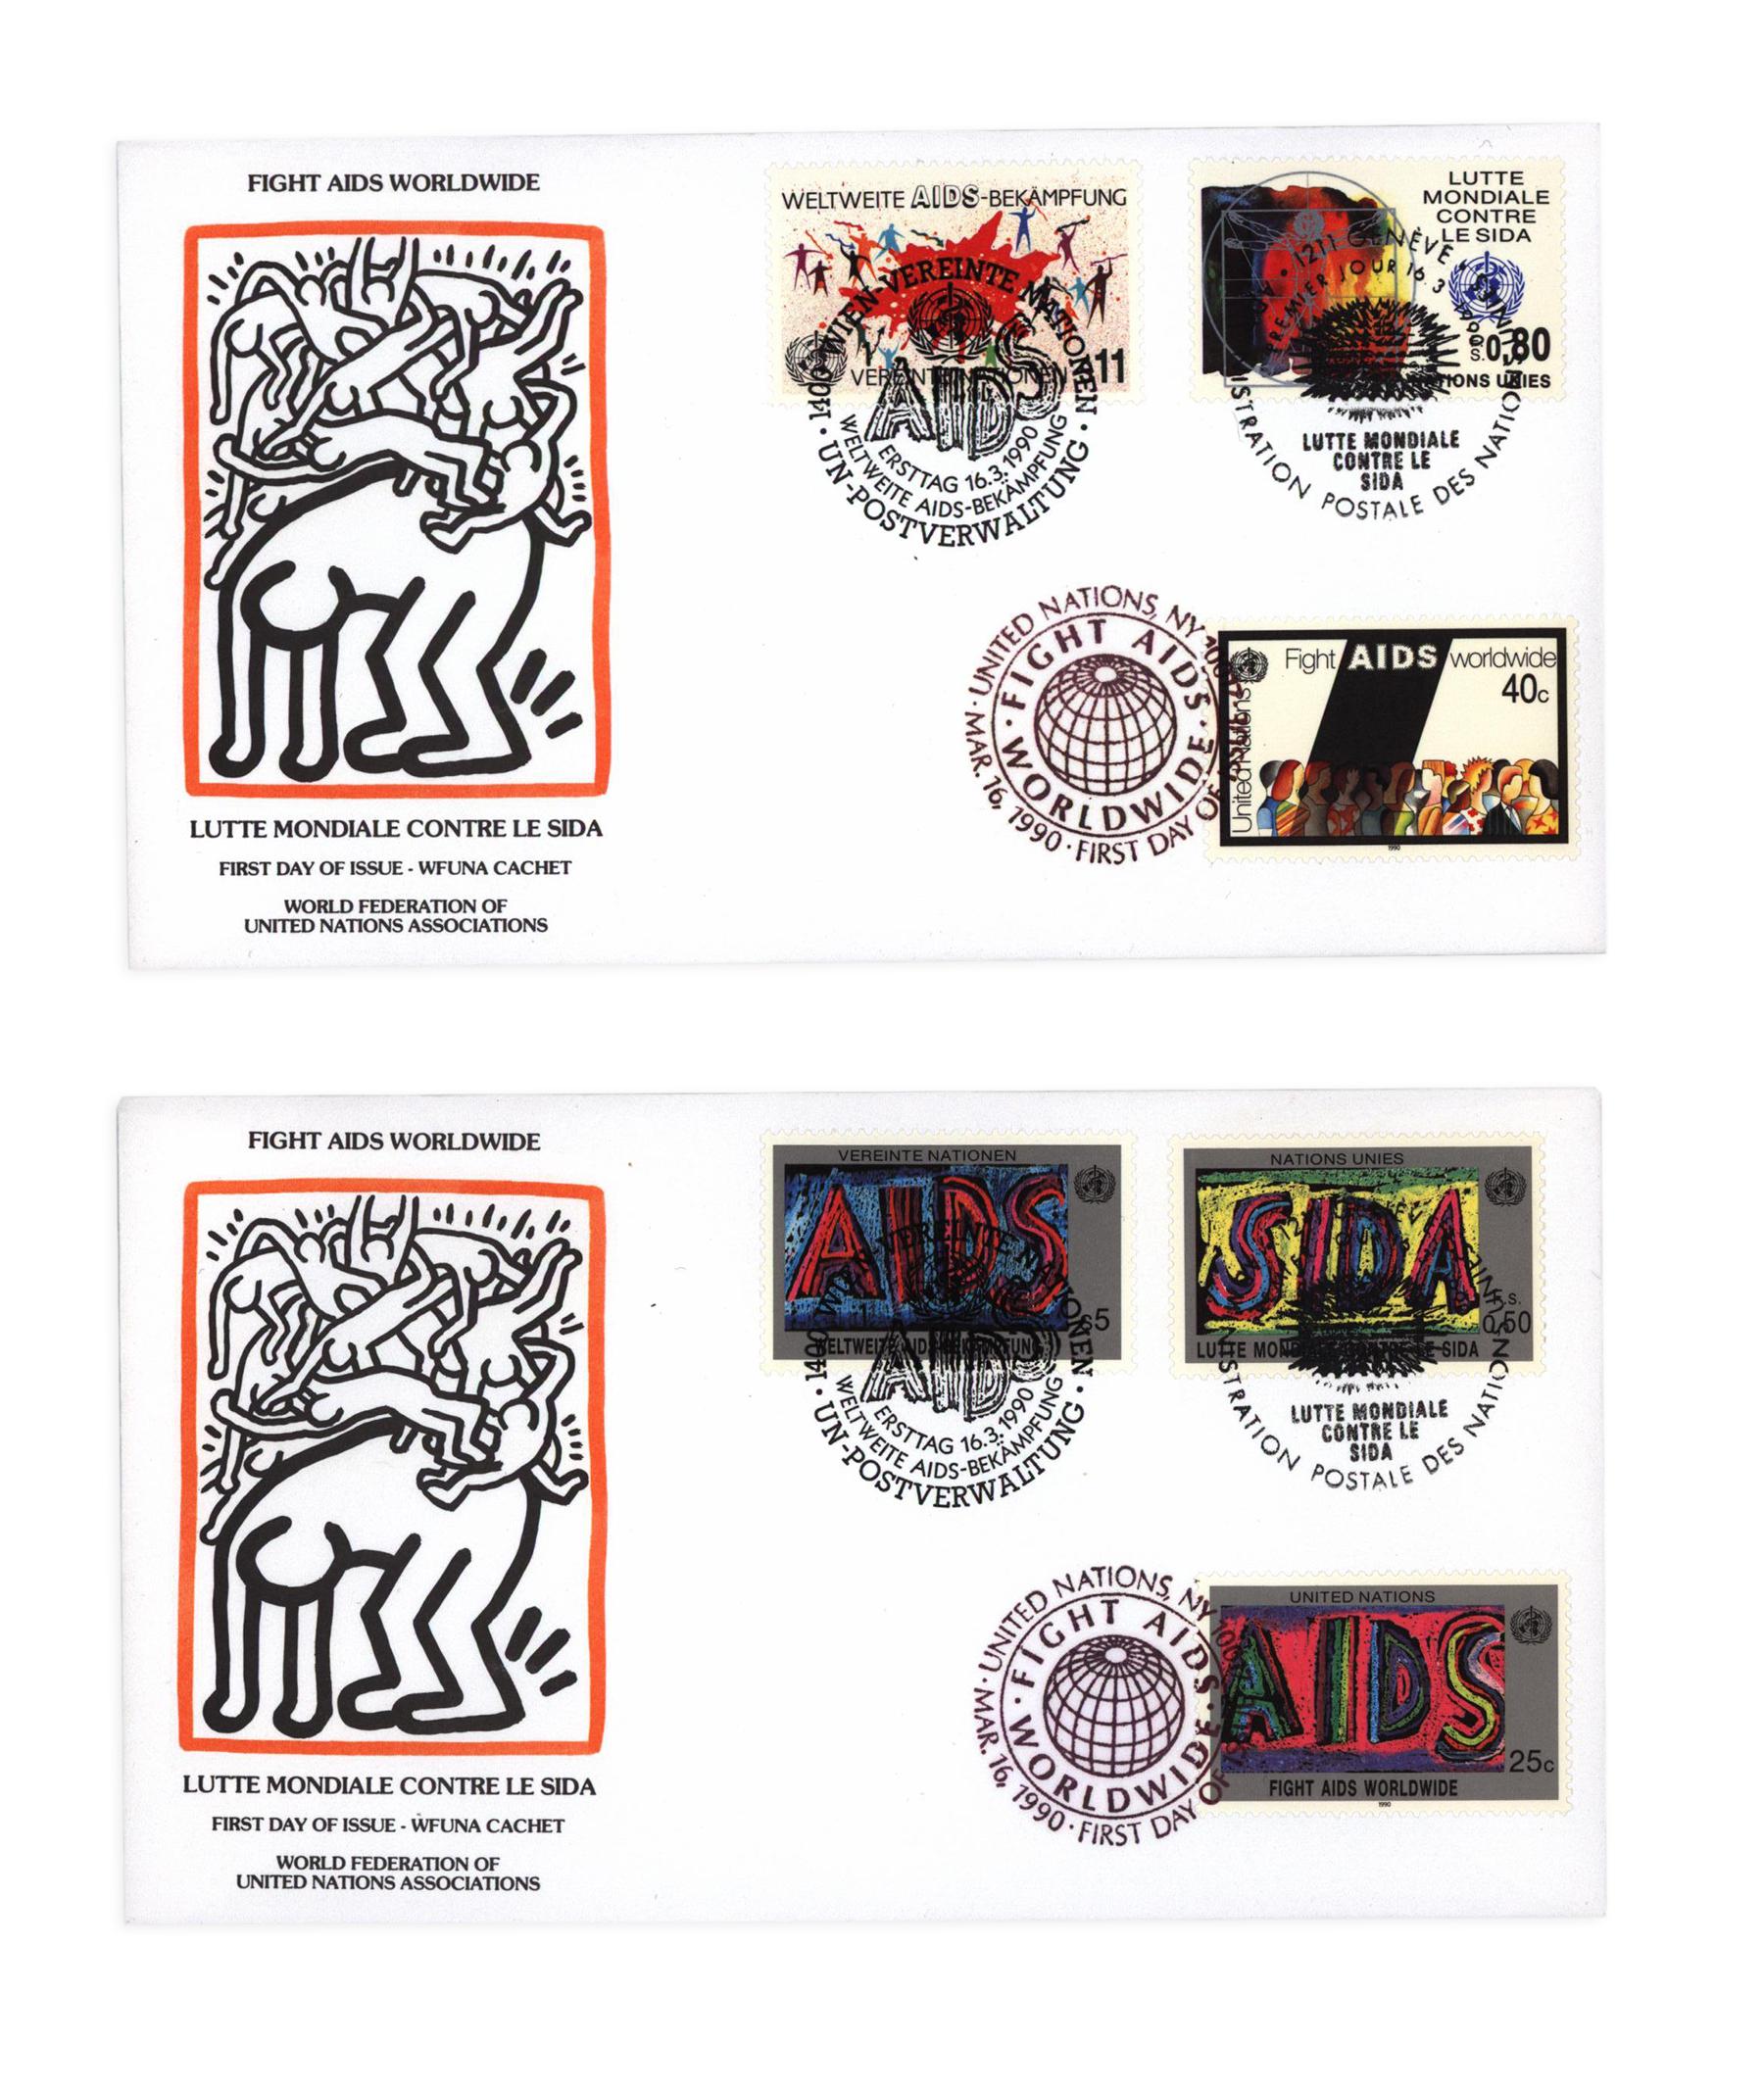 Keith Haring 1980's/1990s ephemera collection (Keith Haring pop shop) For Sale 11